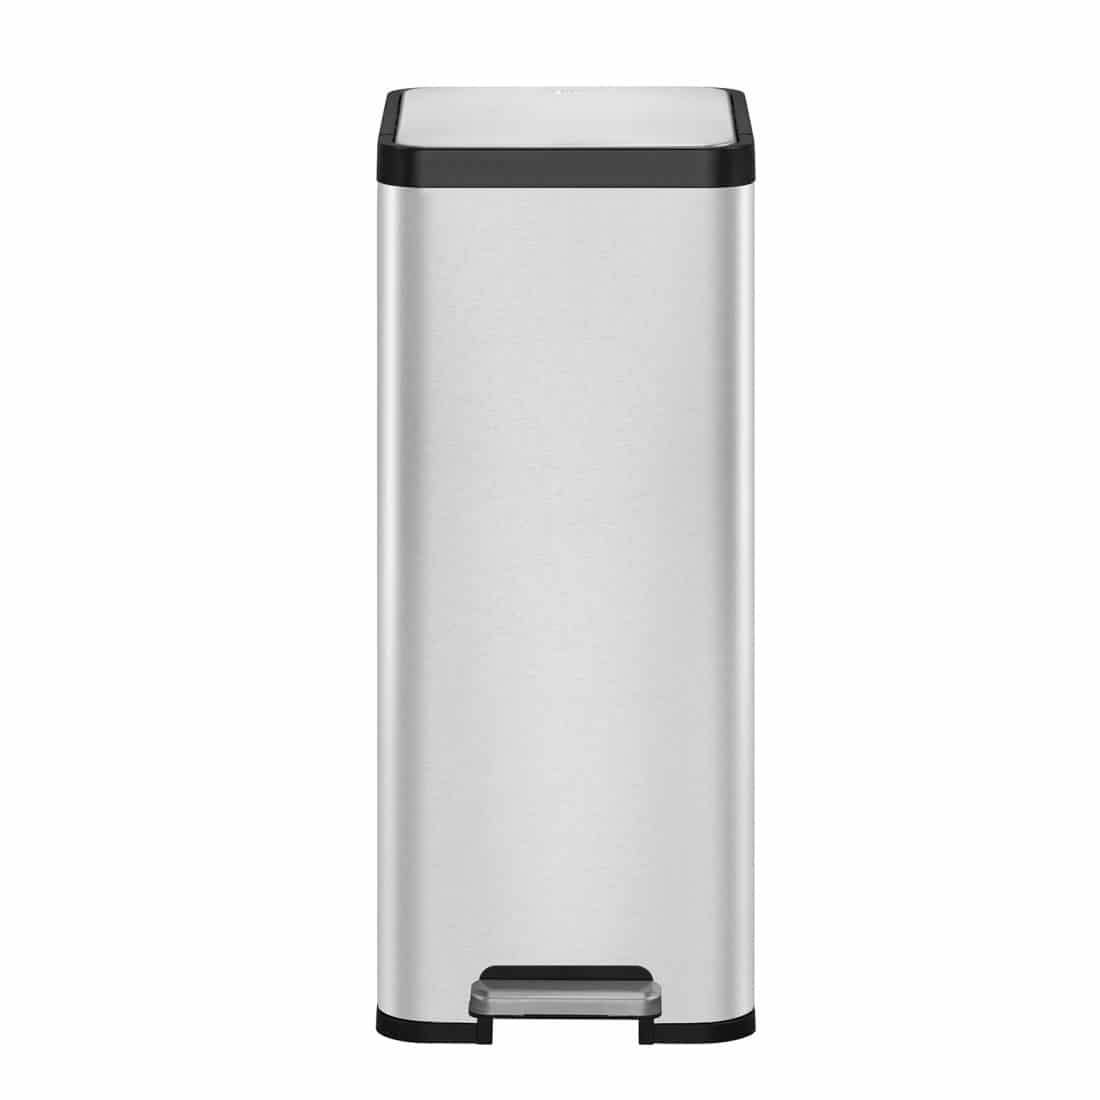 EcoMaid Step Bin 30L Matt s/s Separate waste bin, connectable for recycling